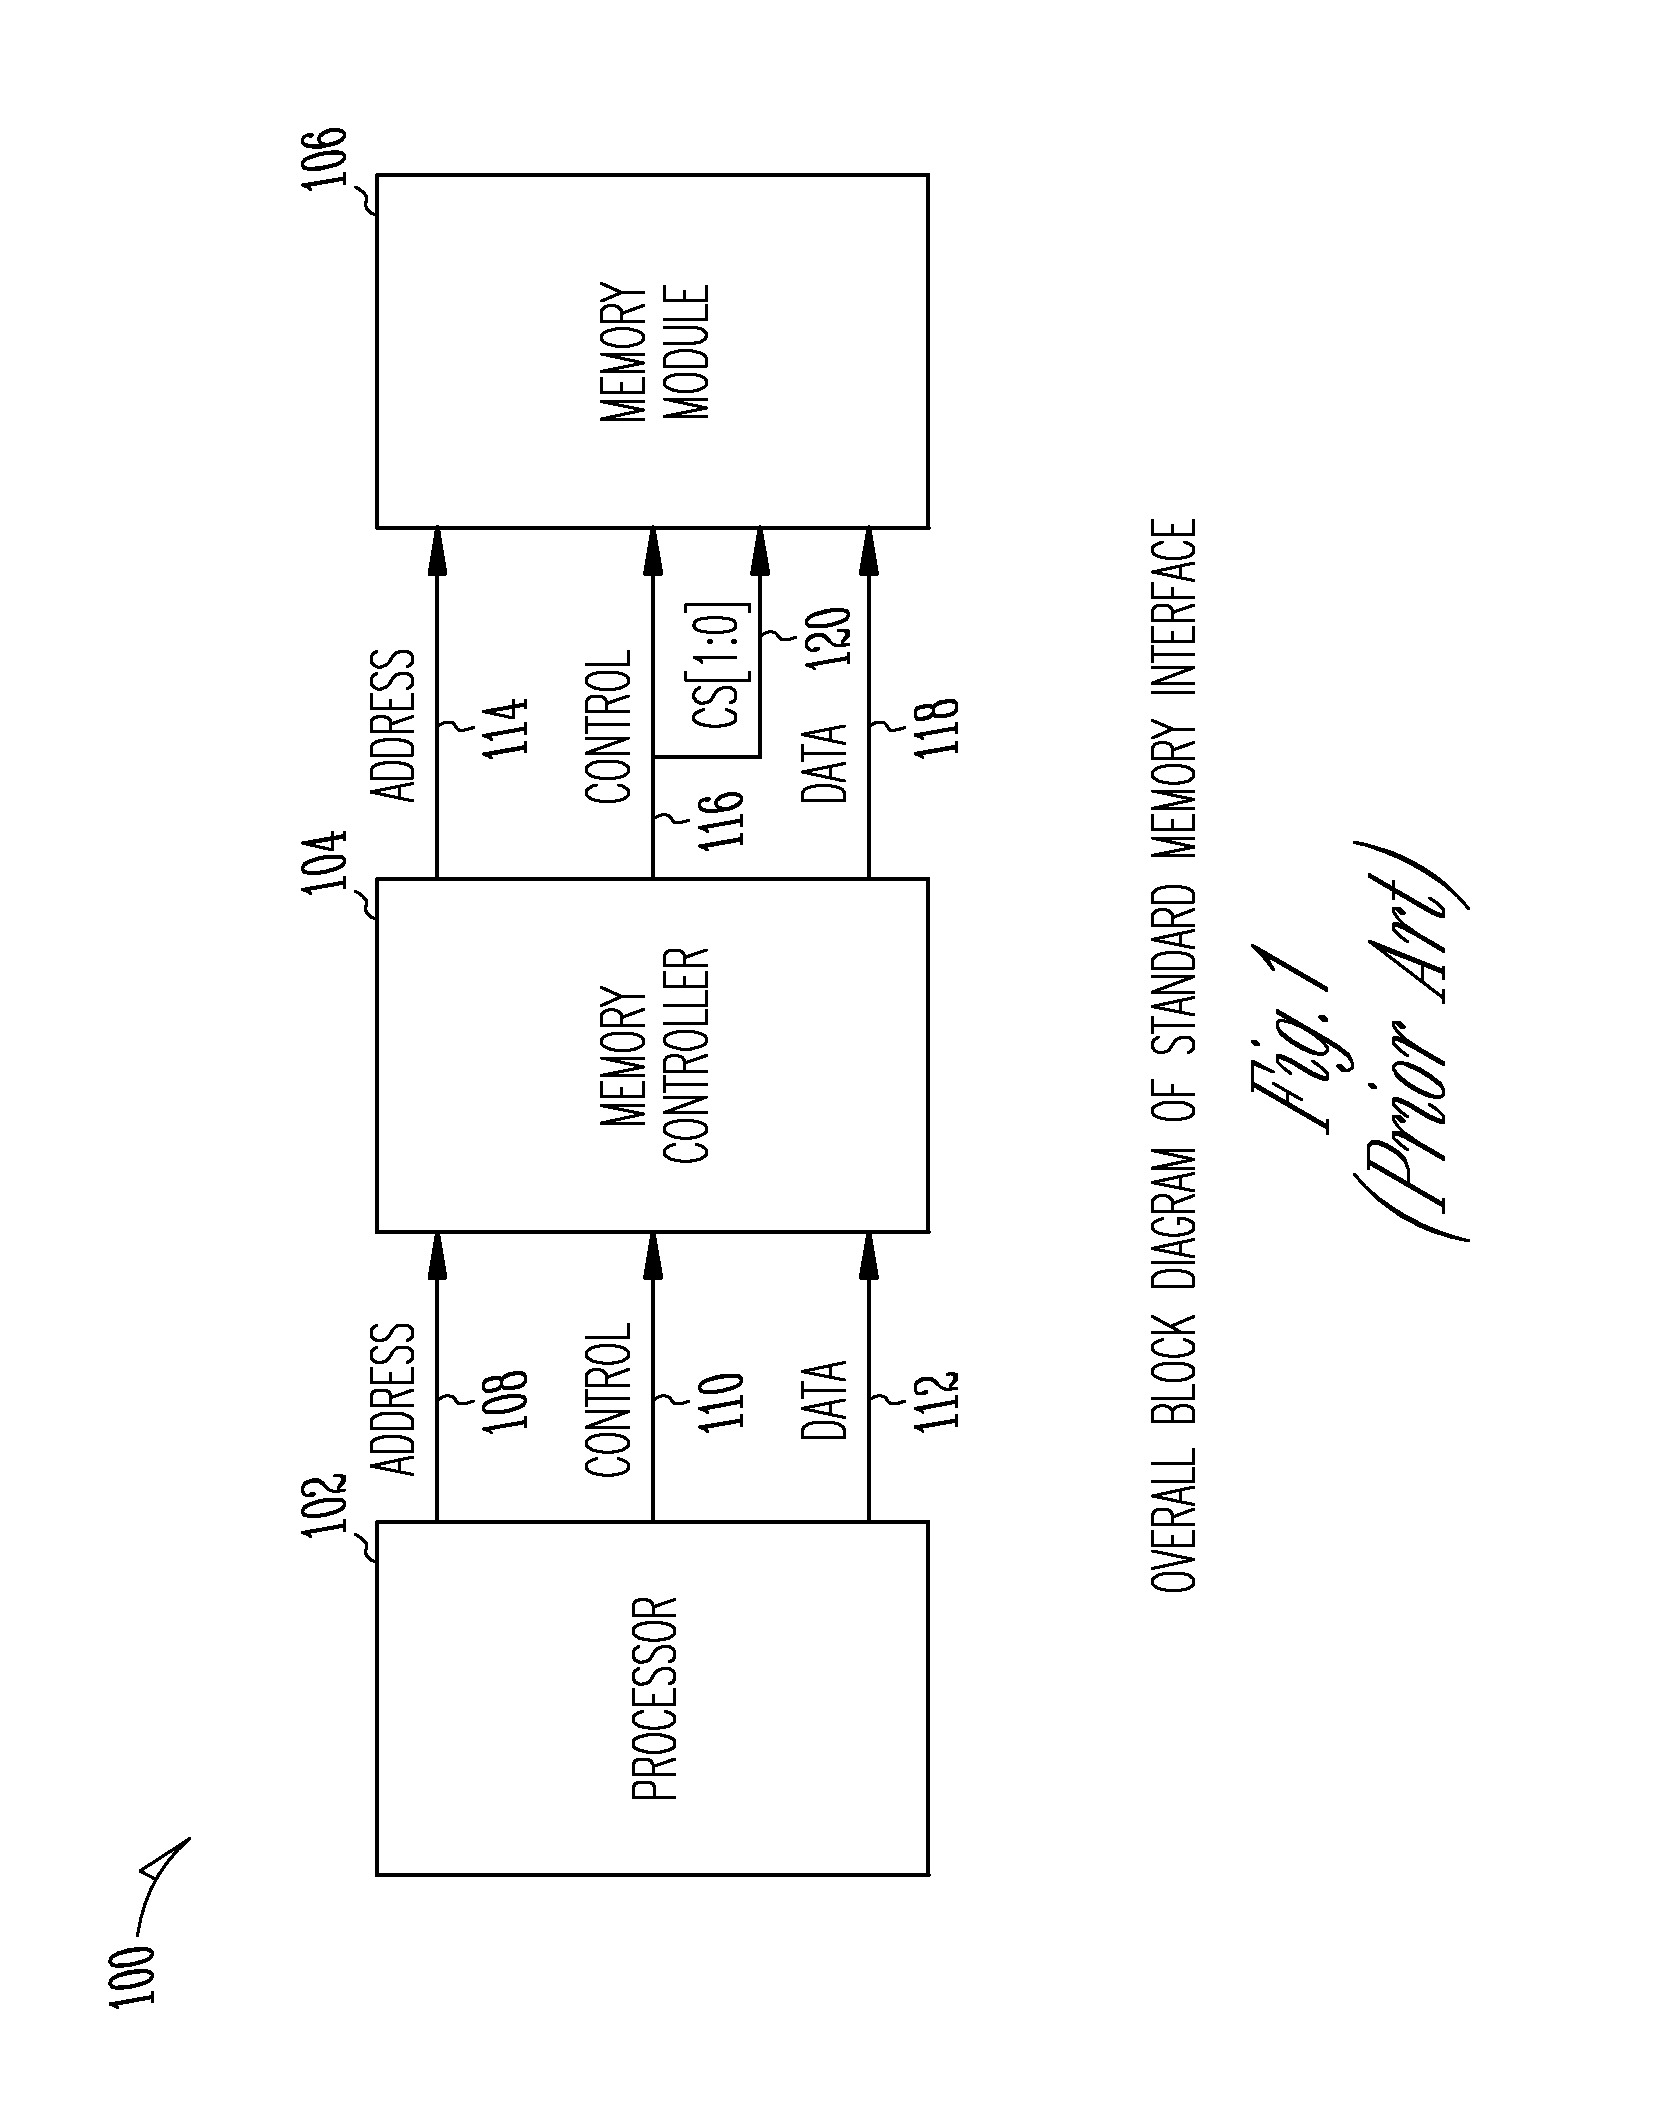 Multi-rank memory module that emulates a memory module having a different number of ranks